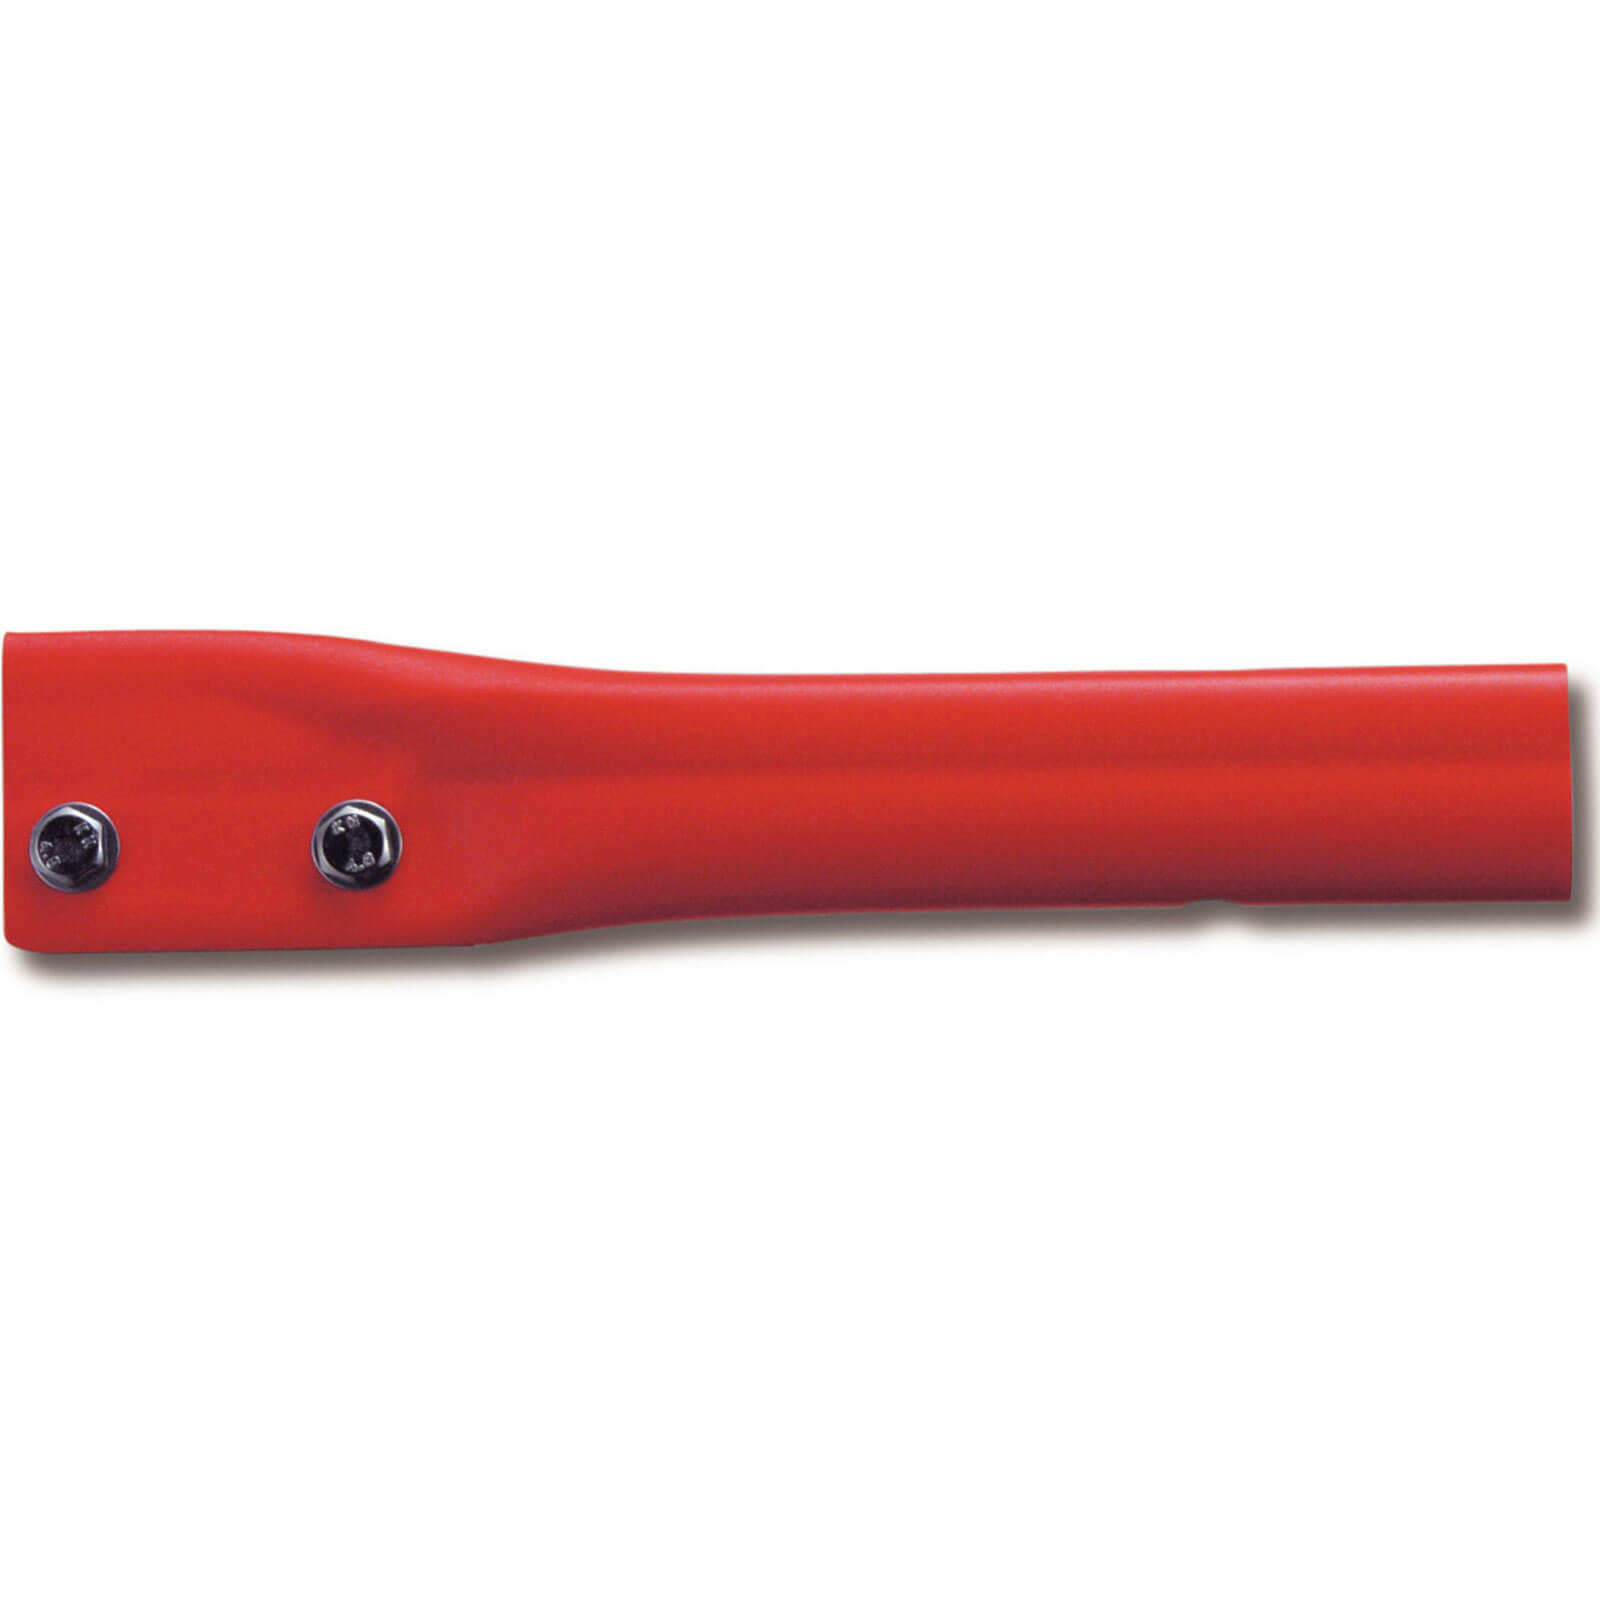 Image of ARS Pole Saw Blade Grip for UV-40 and UV-47